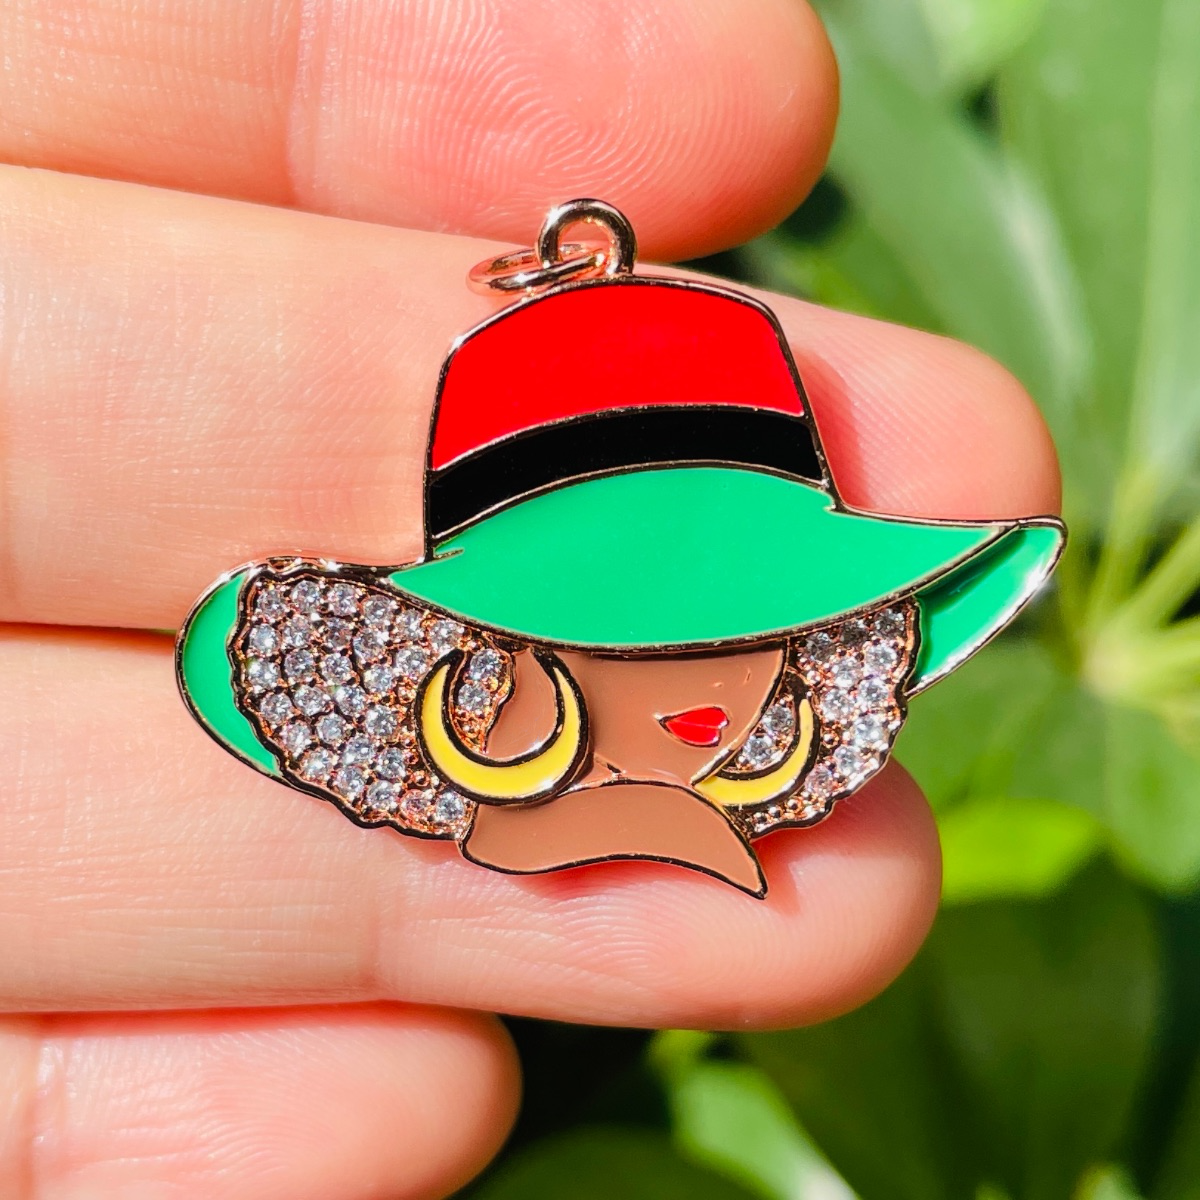 10pcs/lot CZ Paved Red Black Green Hat Afro Black Girl Charms for Juneteenth Awareness Rose Gold CZ Paved Charms Afro Girl/Queen Charms Juneteenth & Black History Month Awareness New Charms Arrivals Charms Beads Beyond